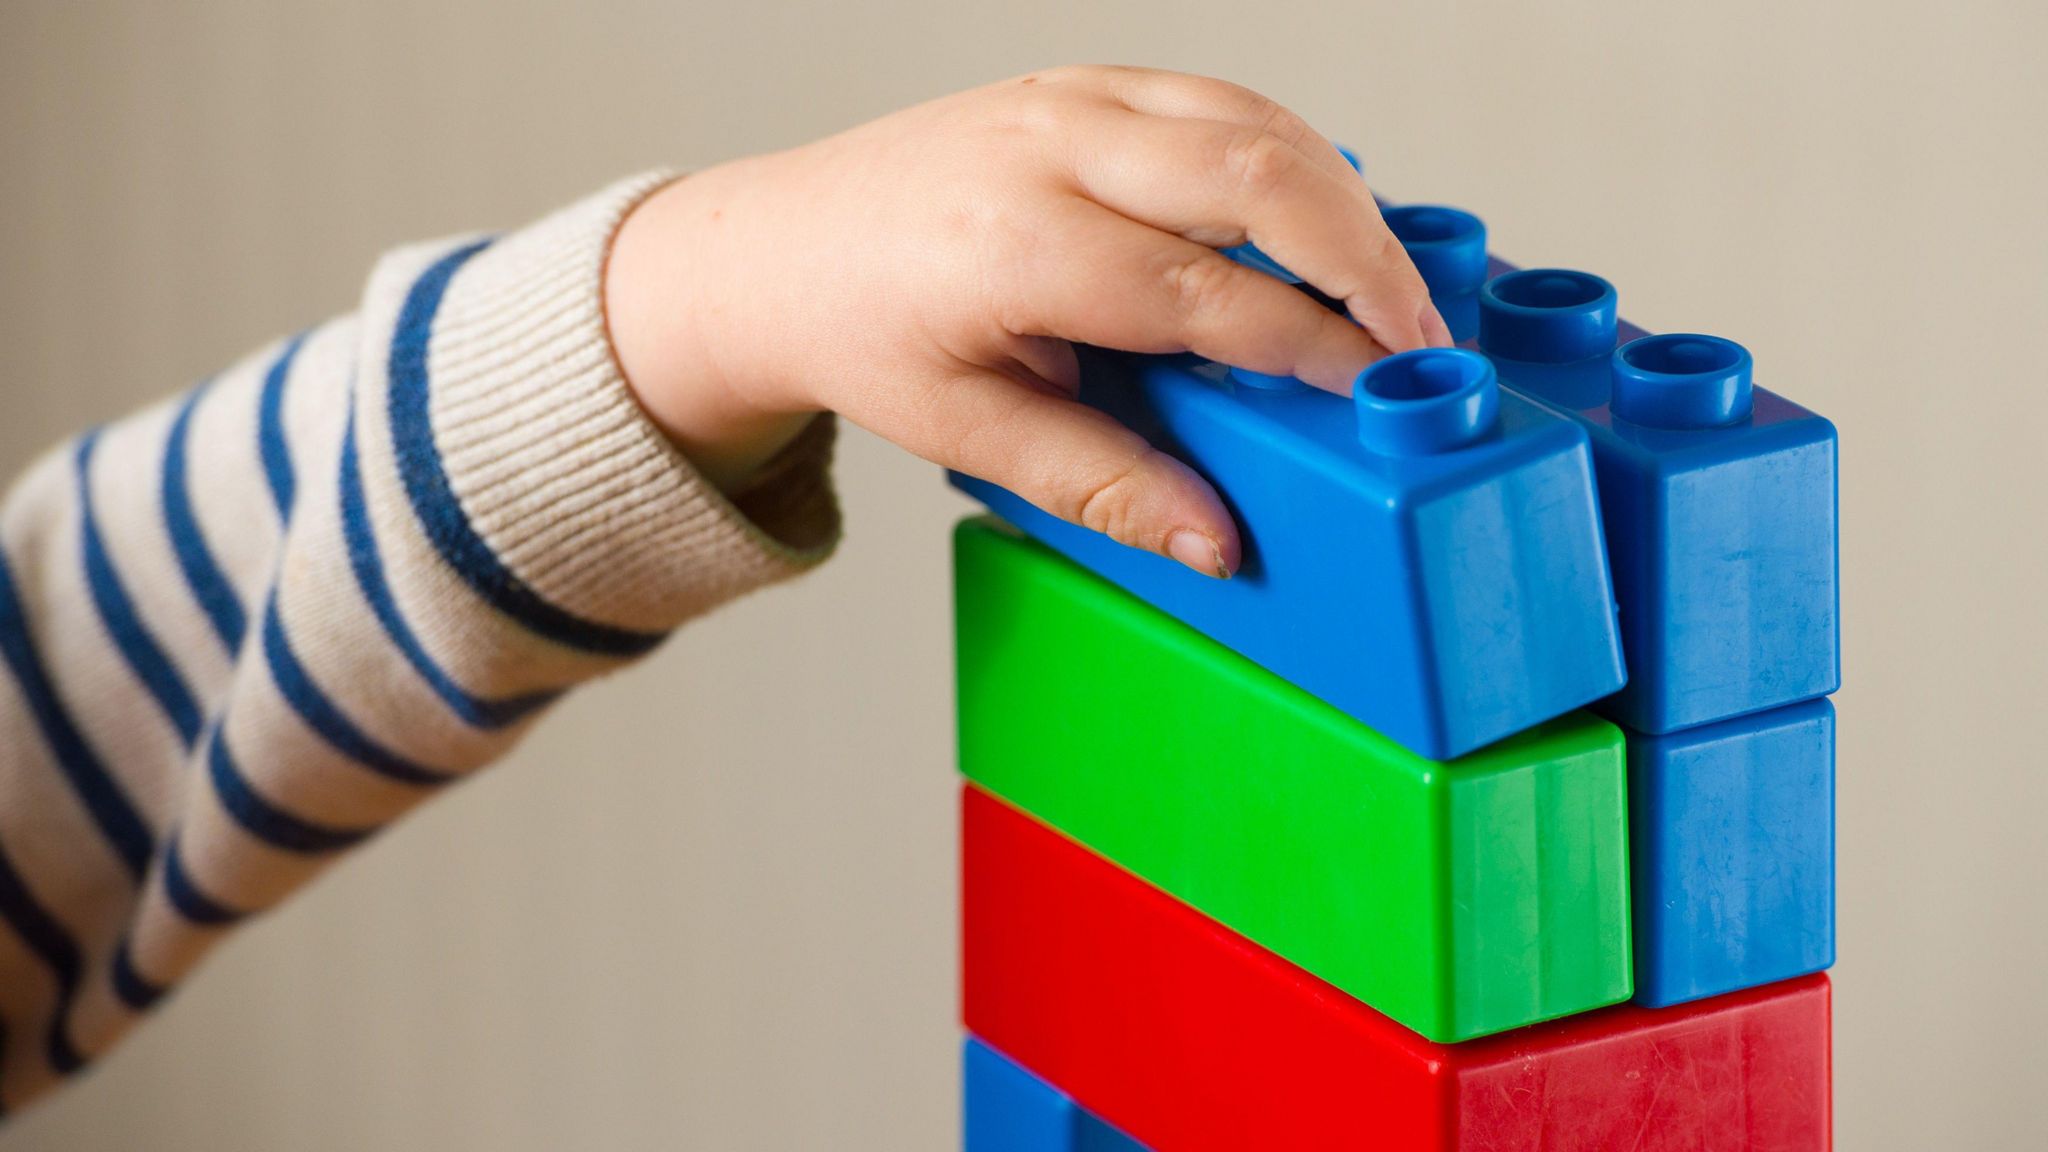 A pre-school age child playing with plastic building blocks